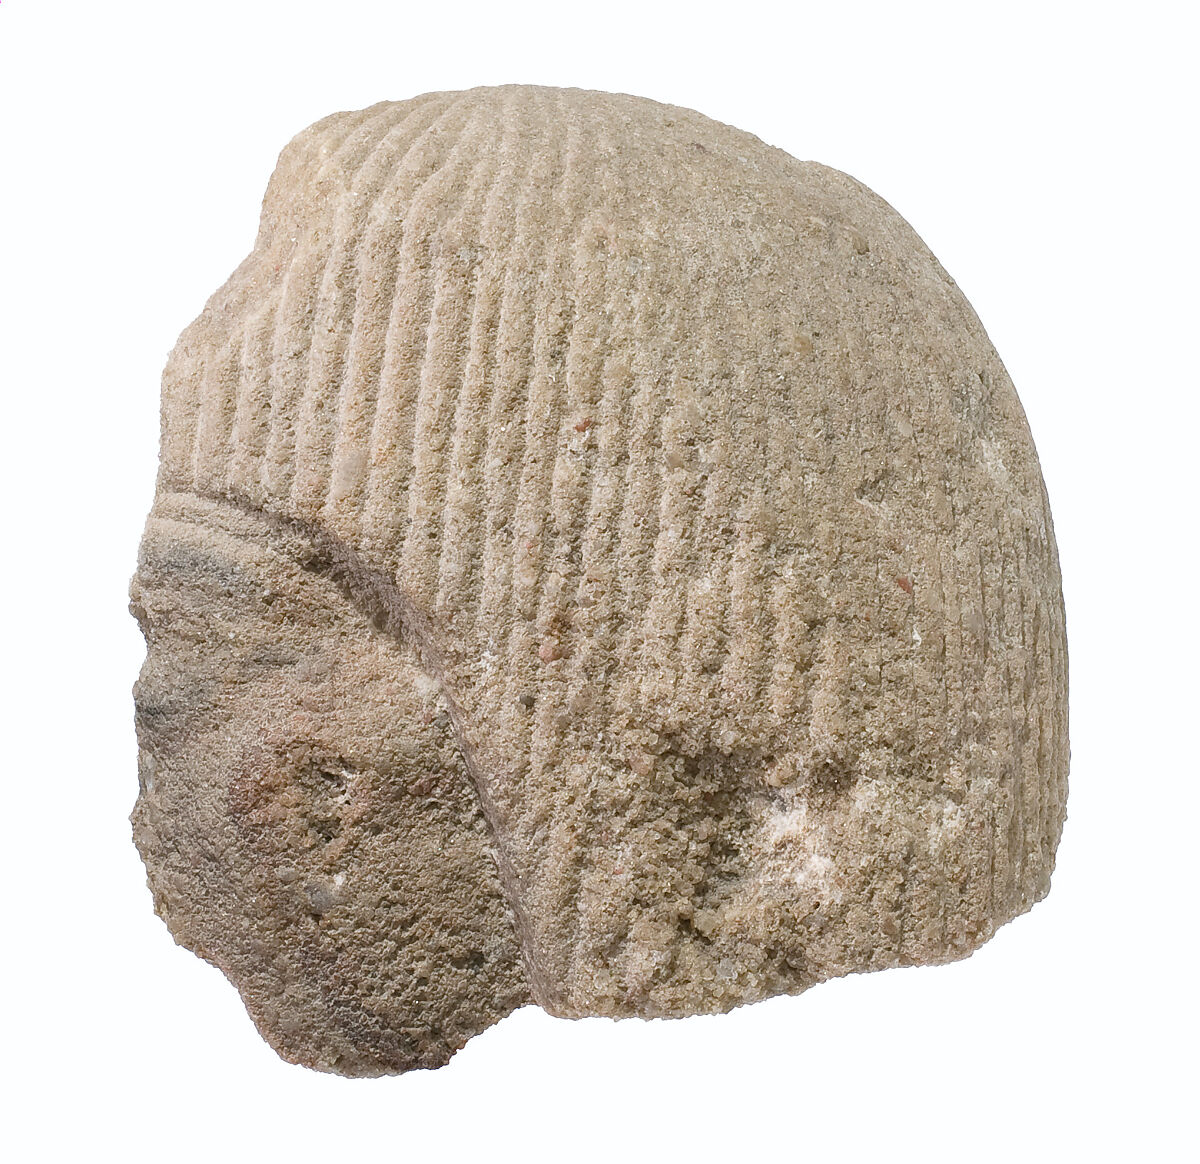 Head of official from a scene, Yellow quartzite, pigment 